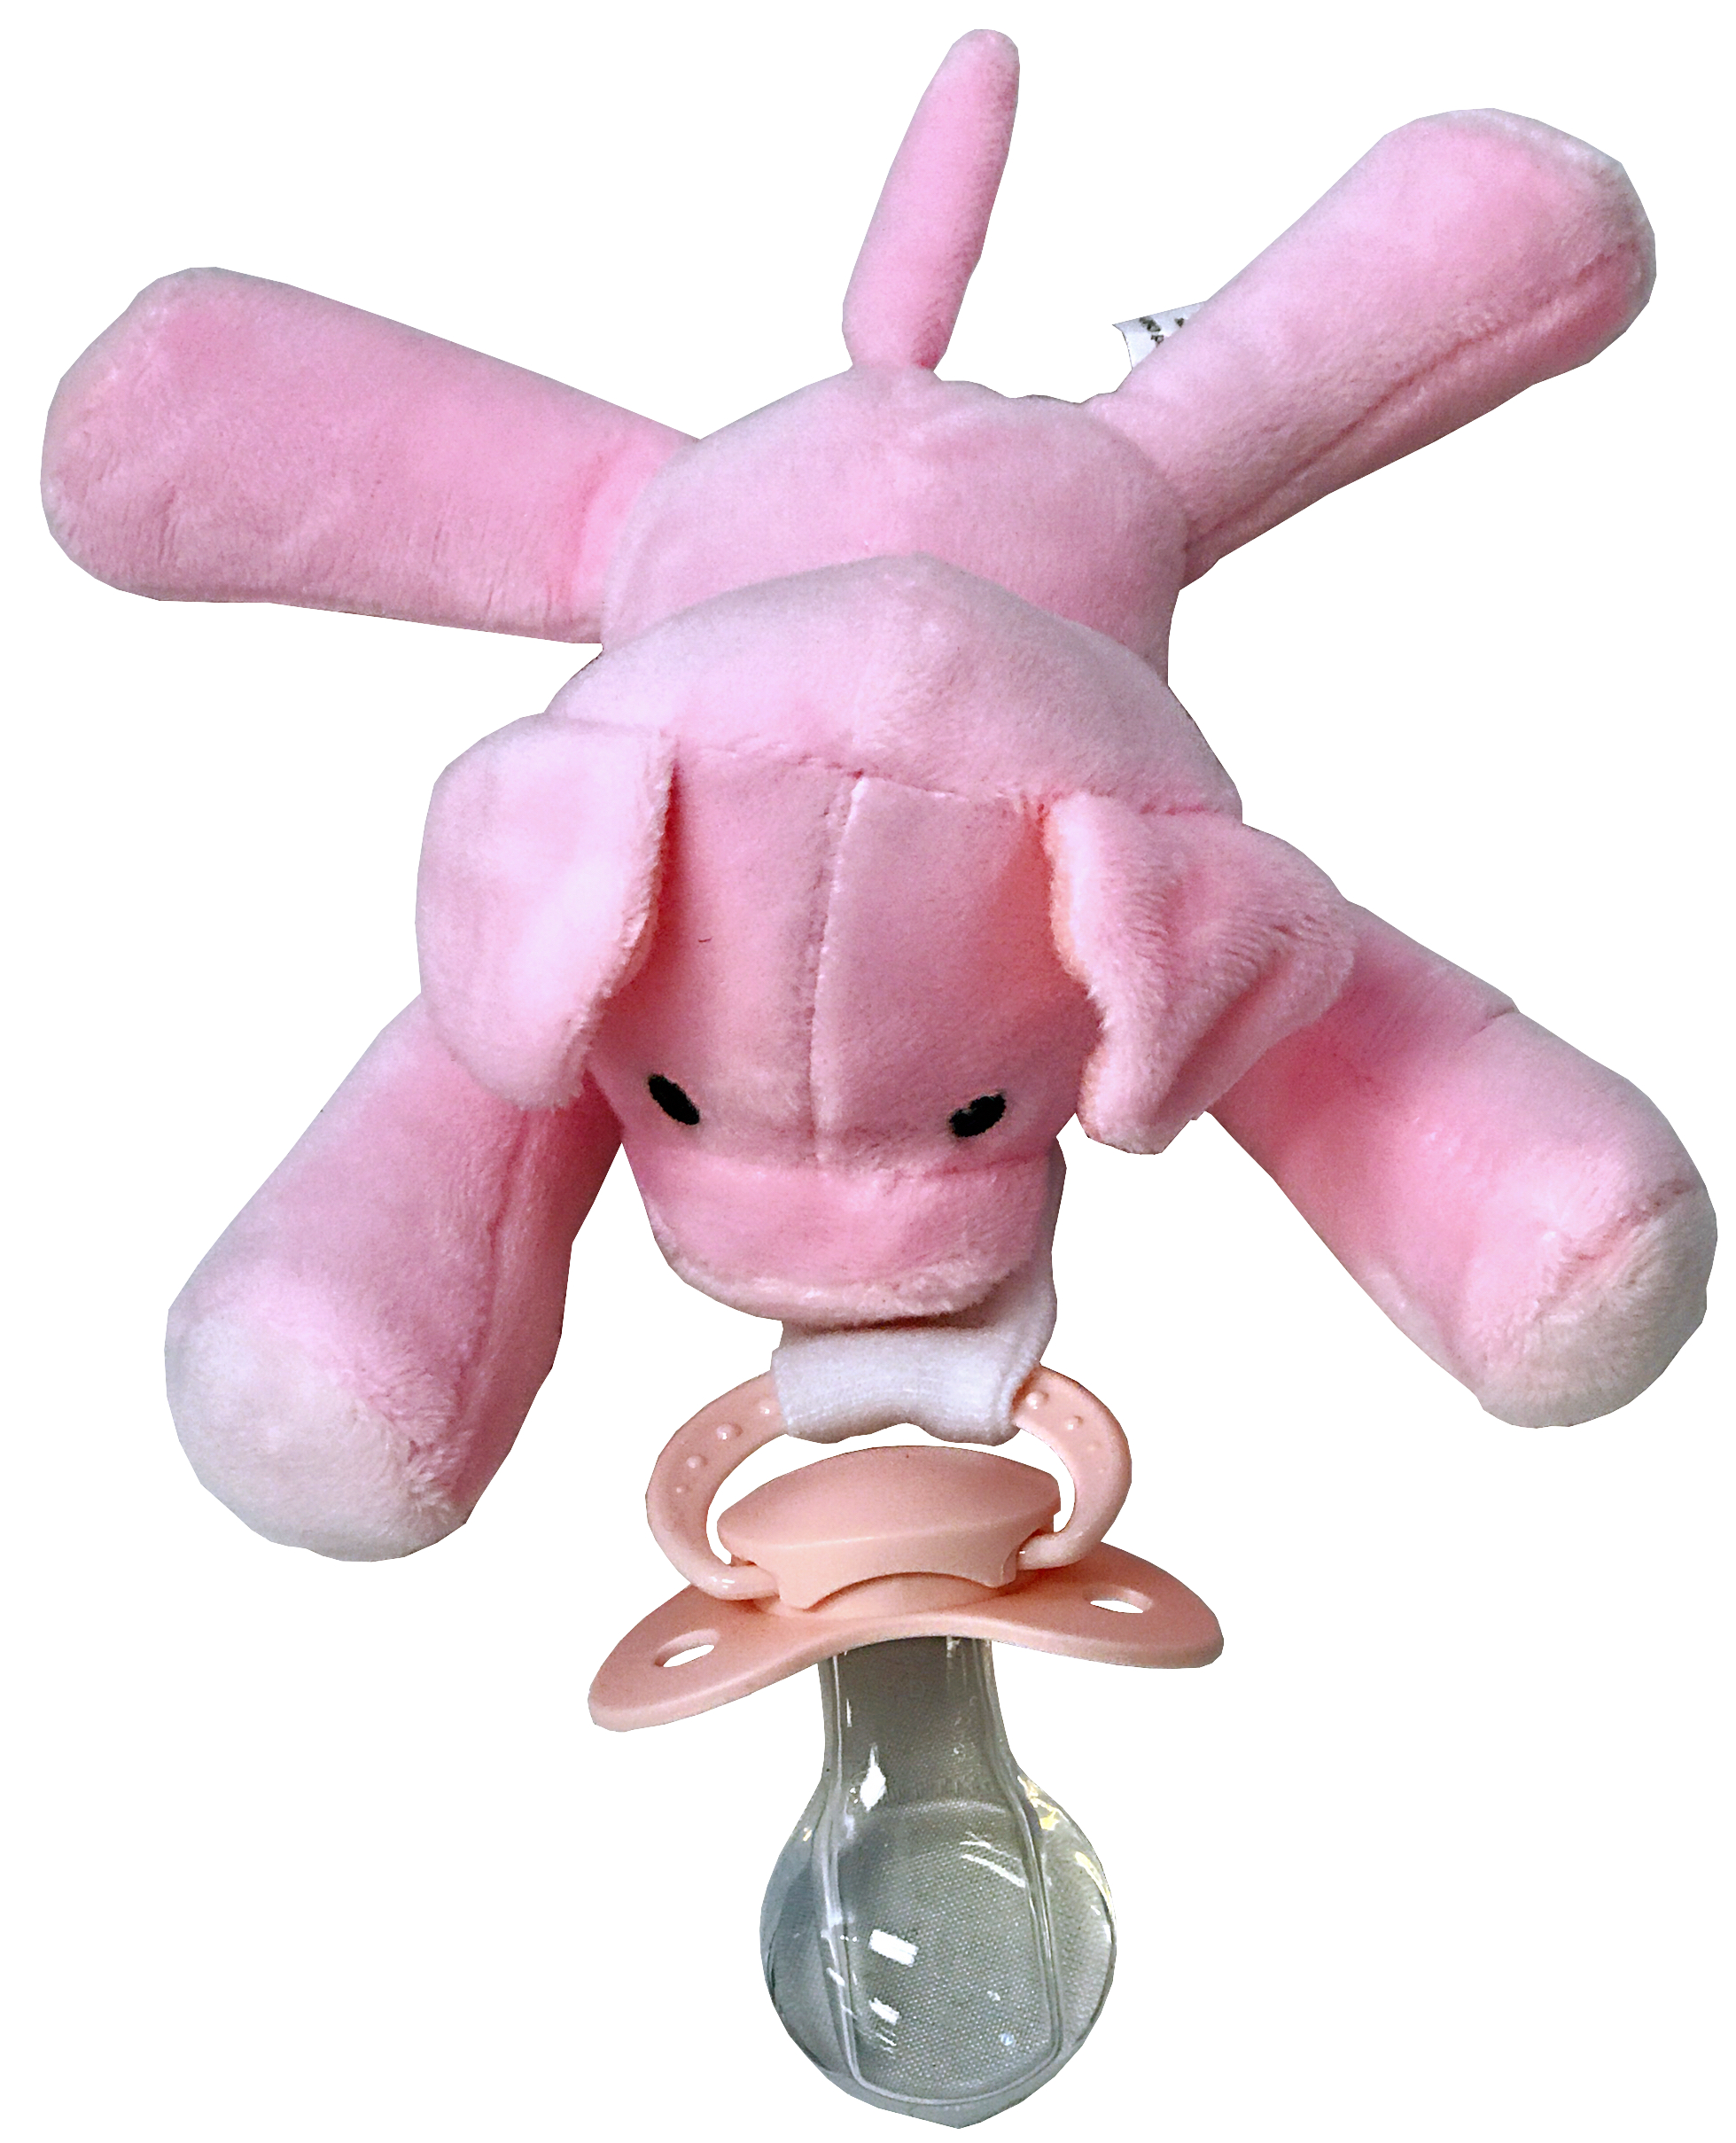 Envy Body Shop Pink Stuffed Bunny with Green Pacifier 